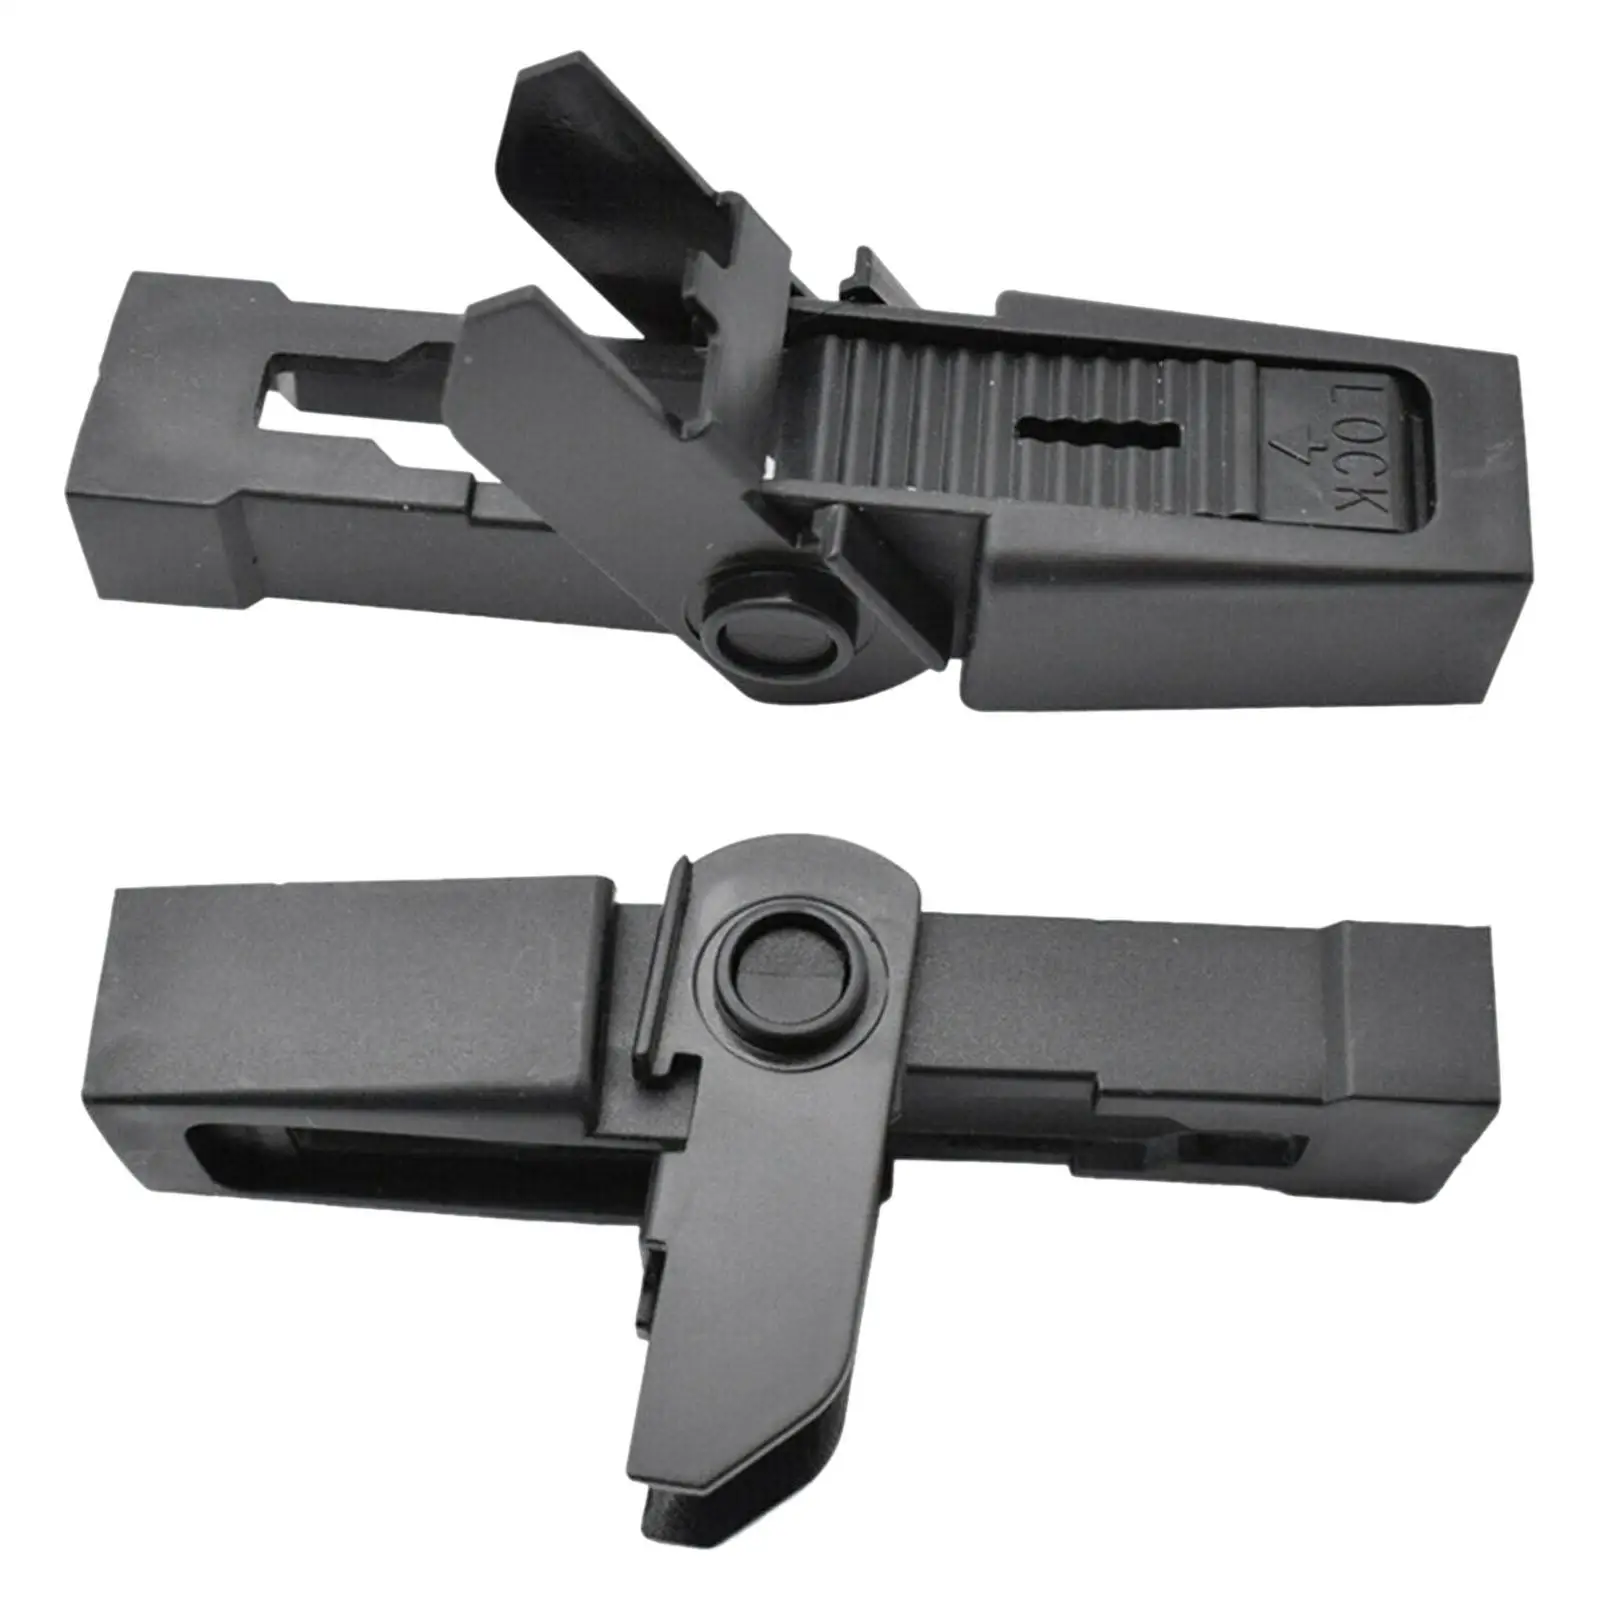 2x Auto Front Wiper Clip, Dkw100020 Black for Discovery 2 L322 Accessories High Quality.